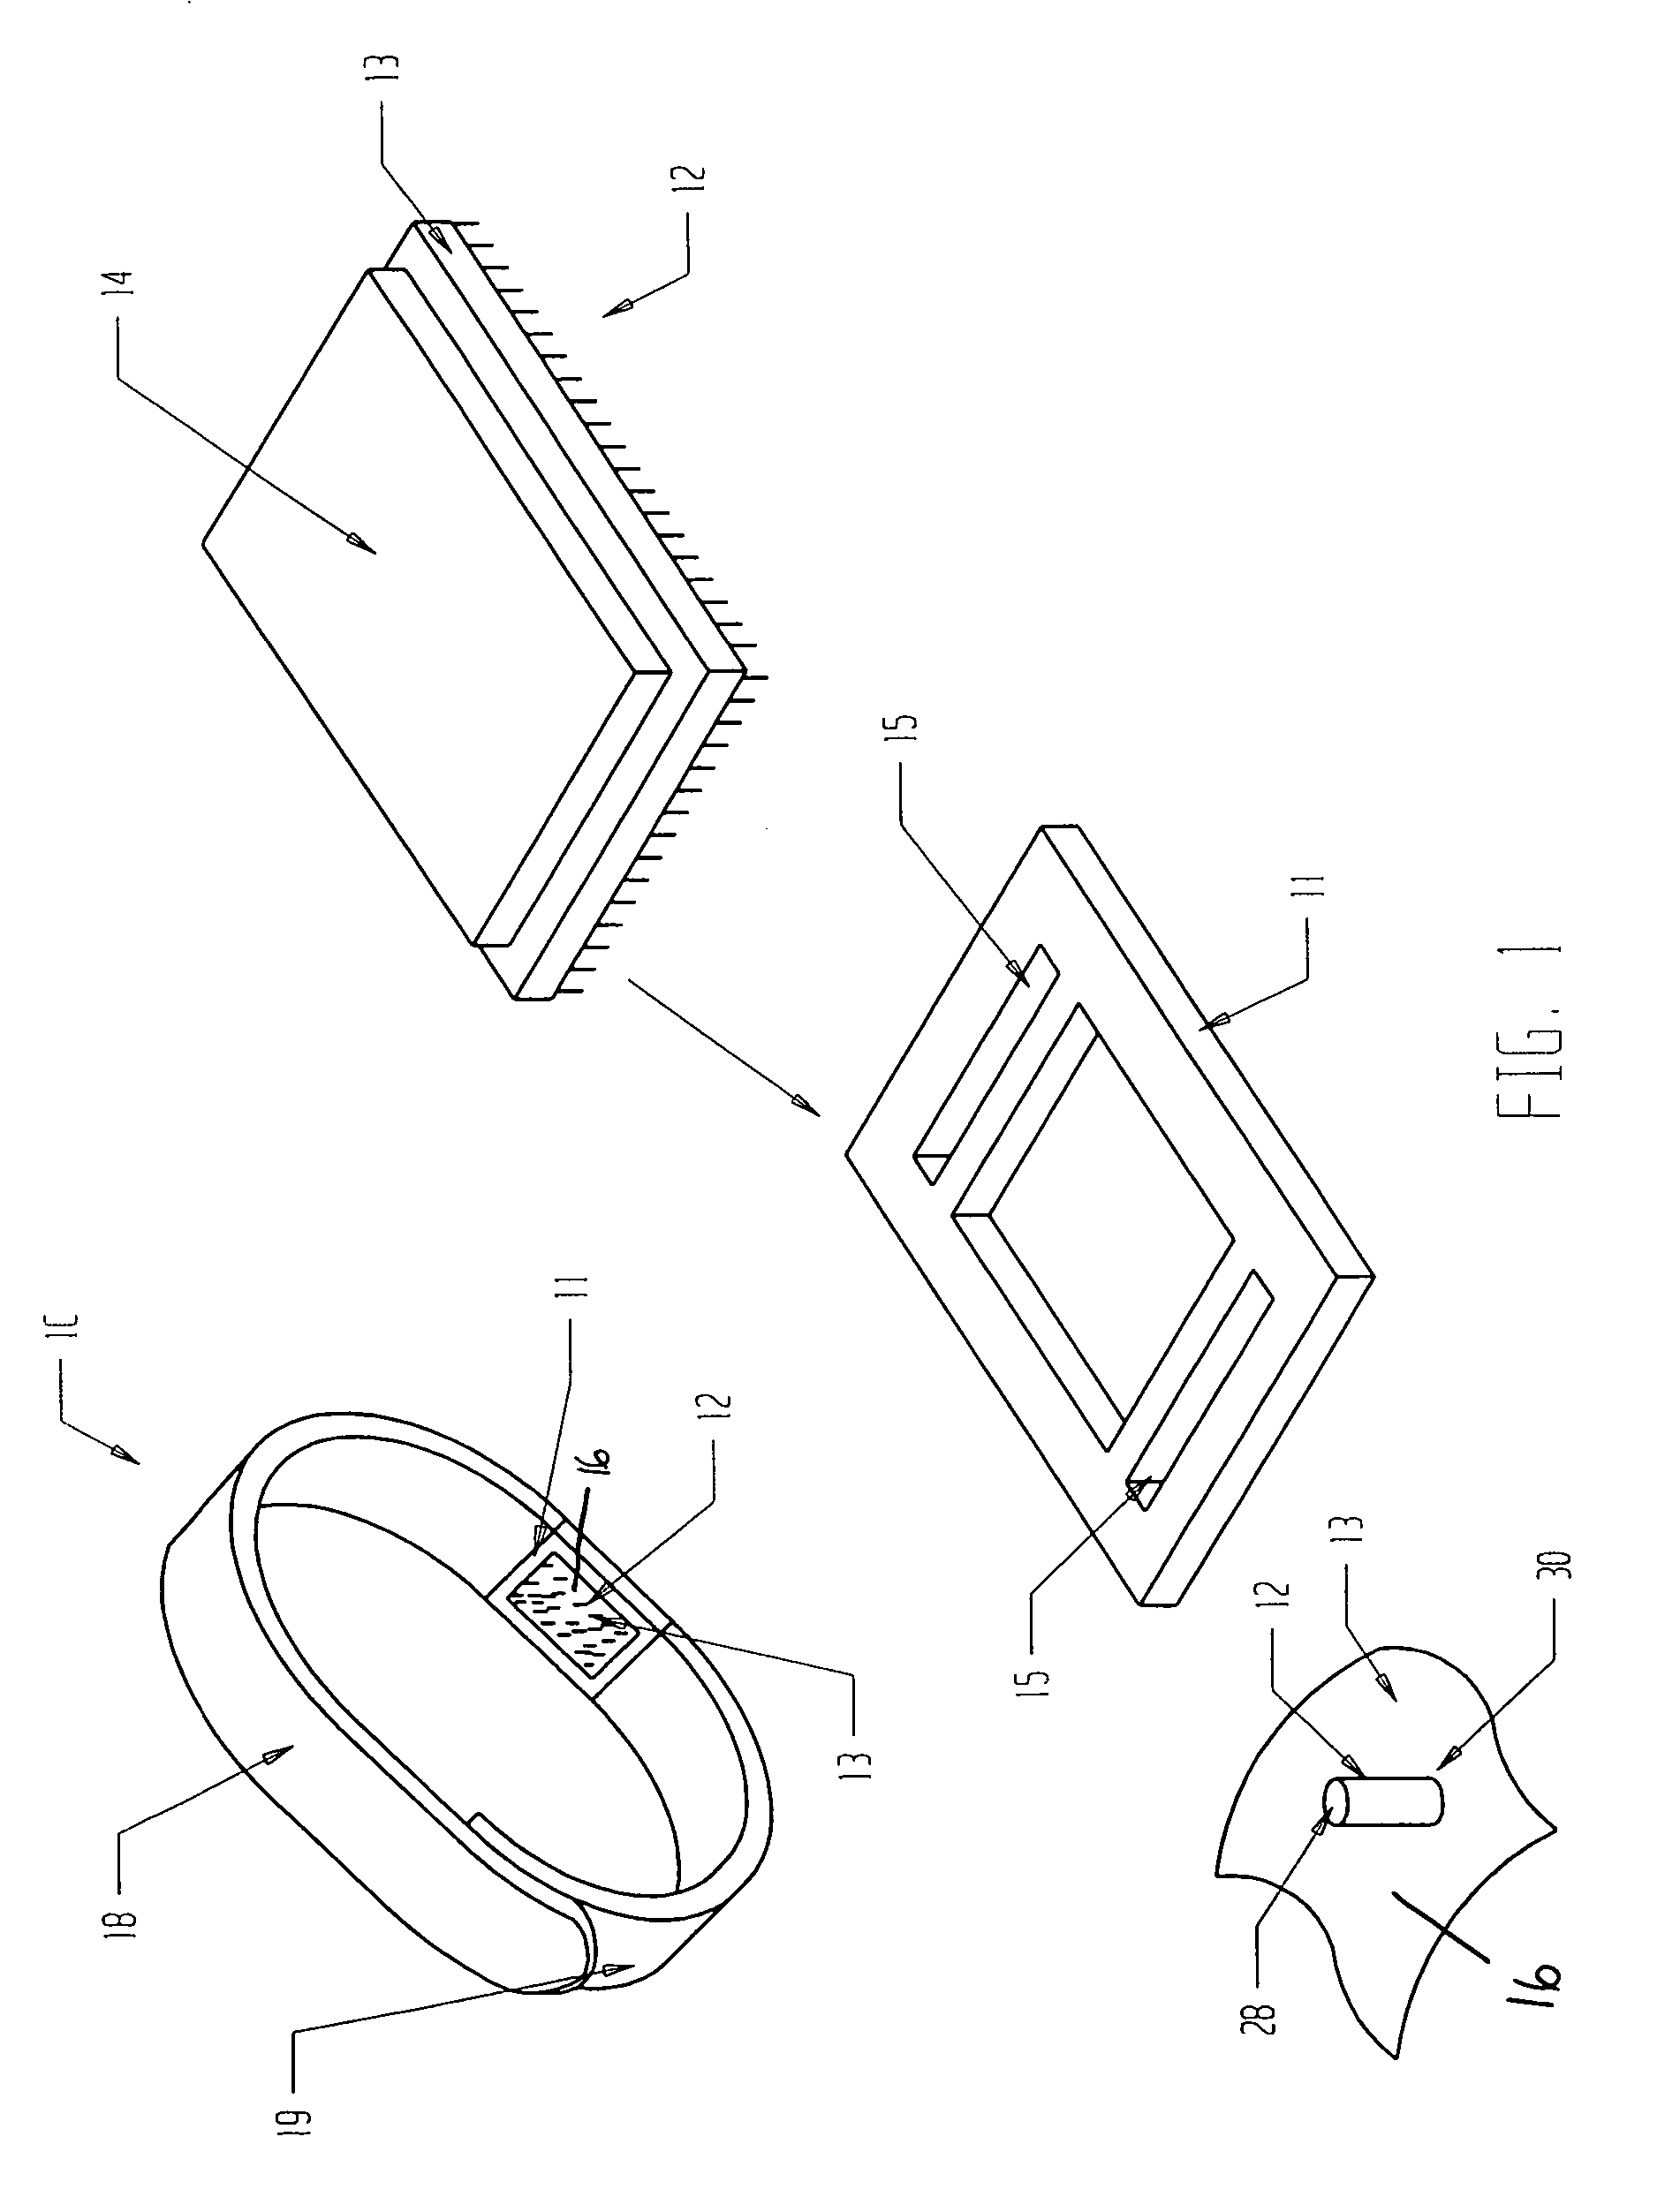 Apparatus and method for treatment of soft tissue injuries